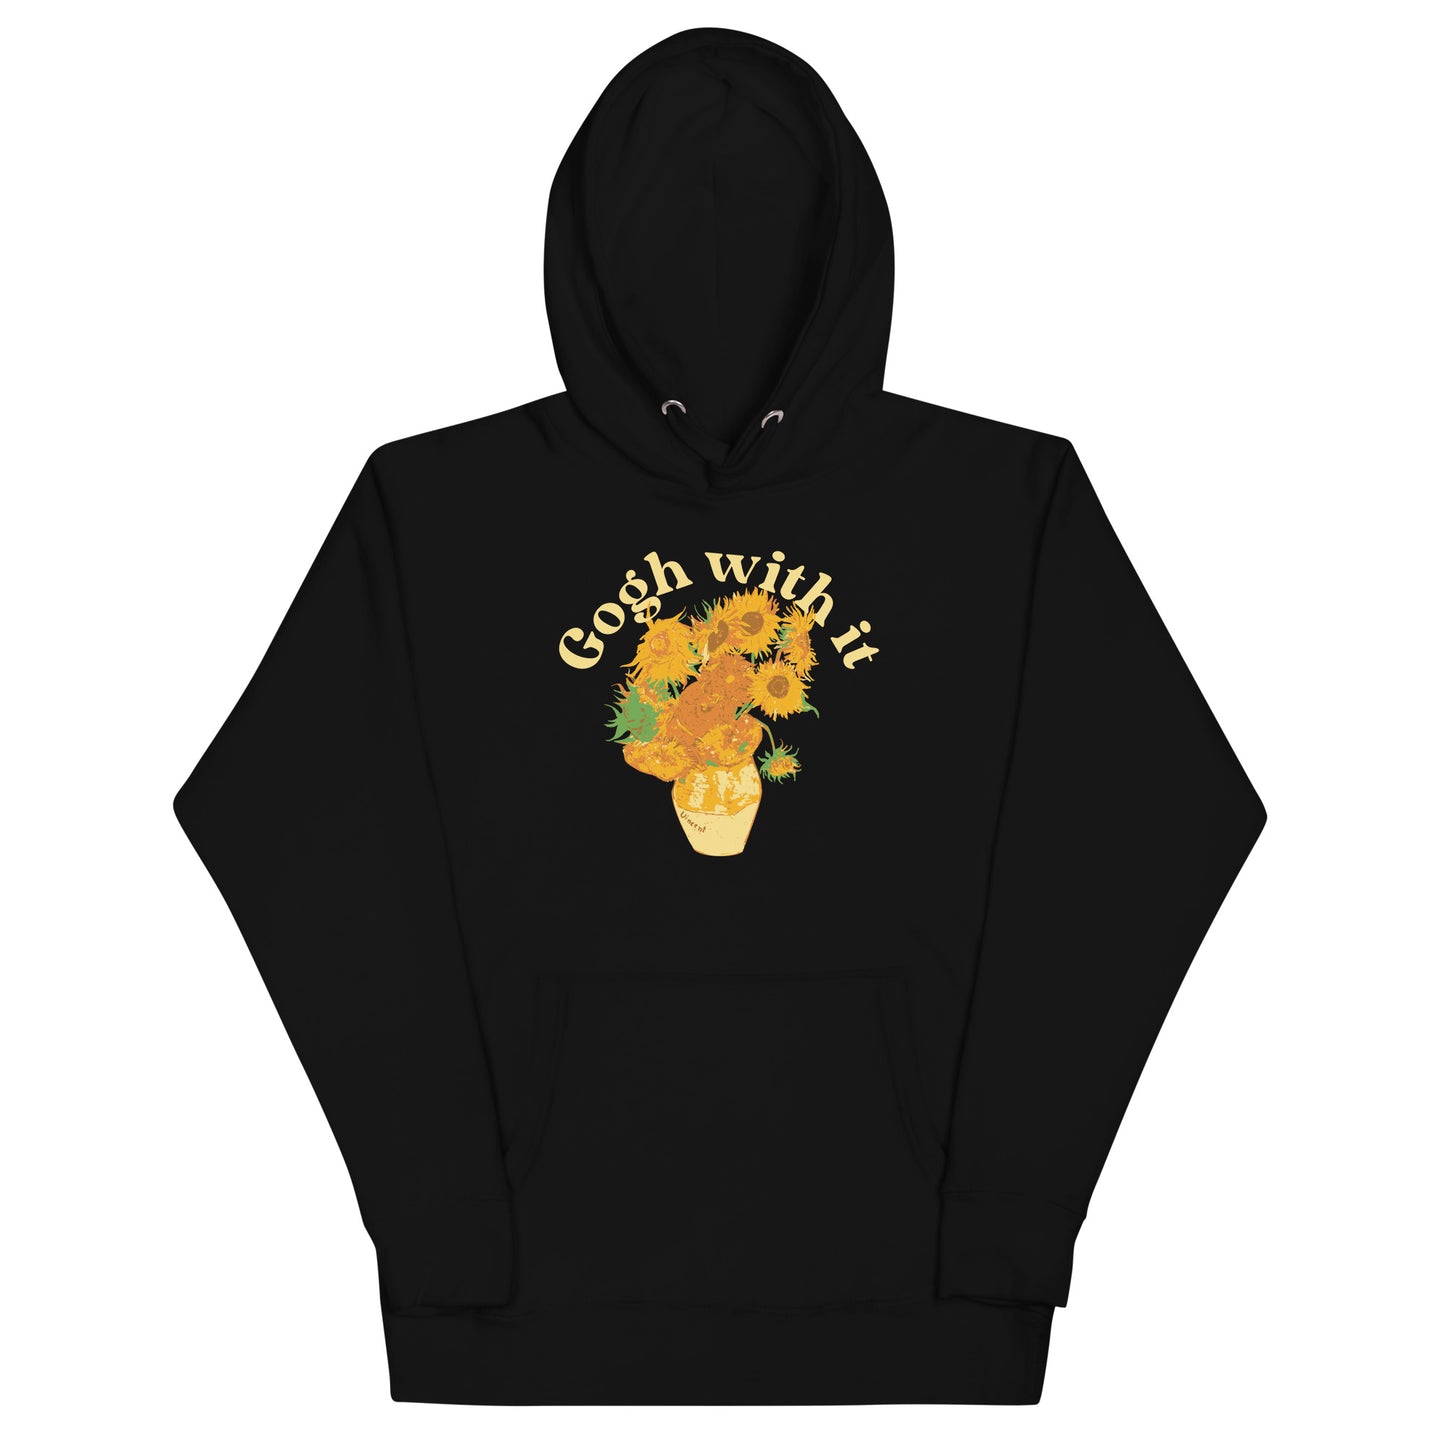 Gogh With It Unisex Hoodie